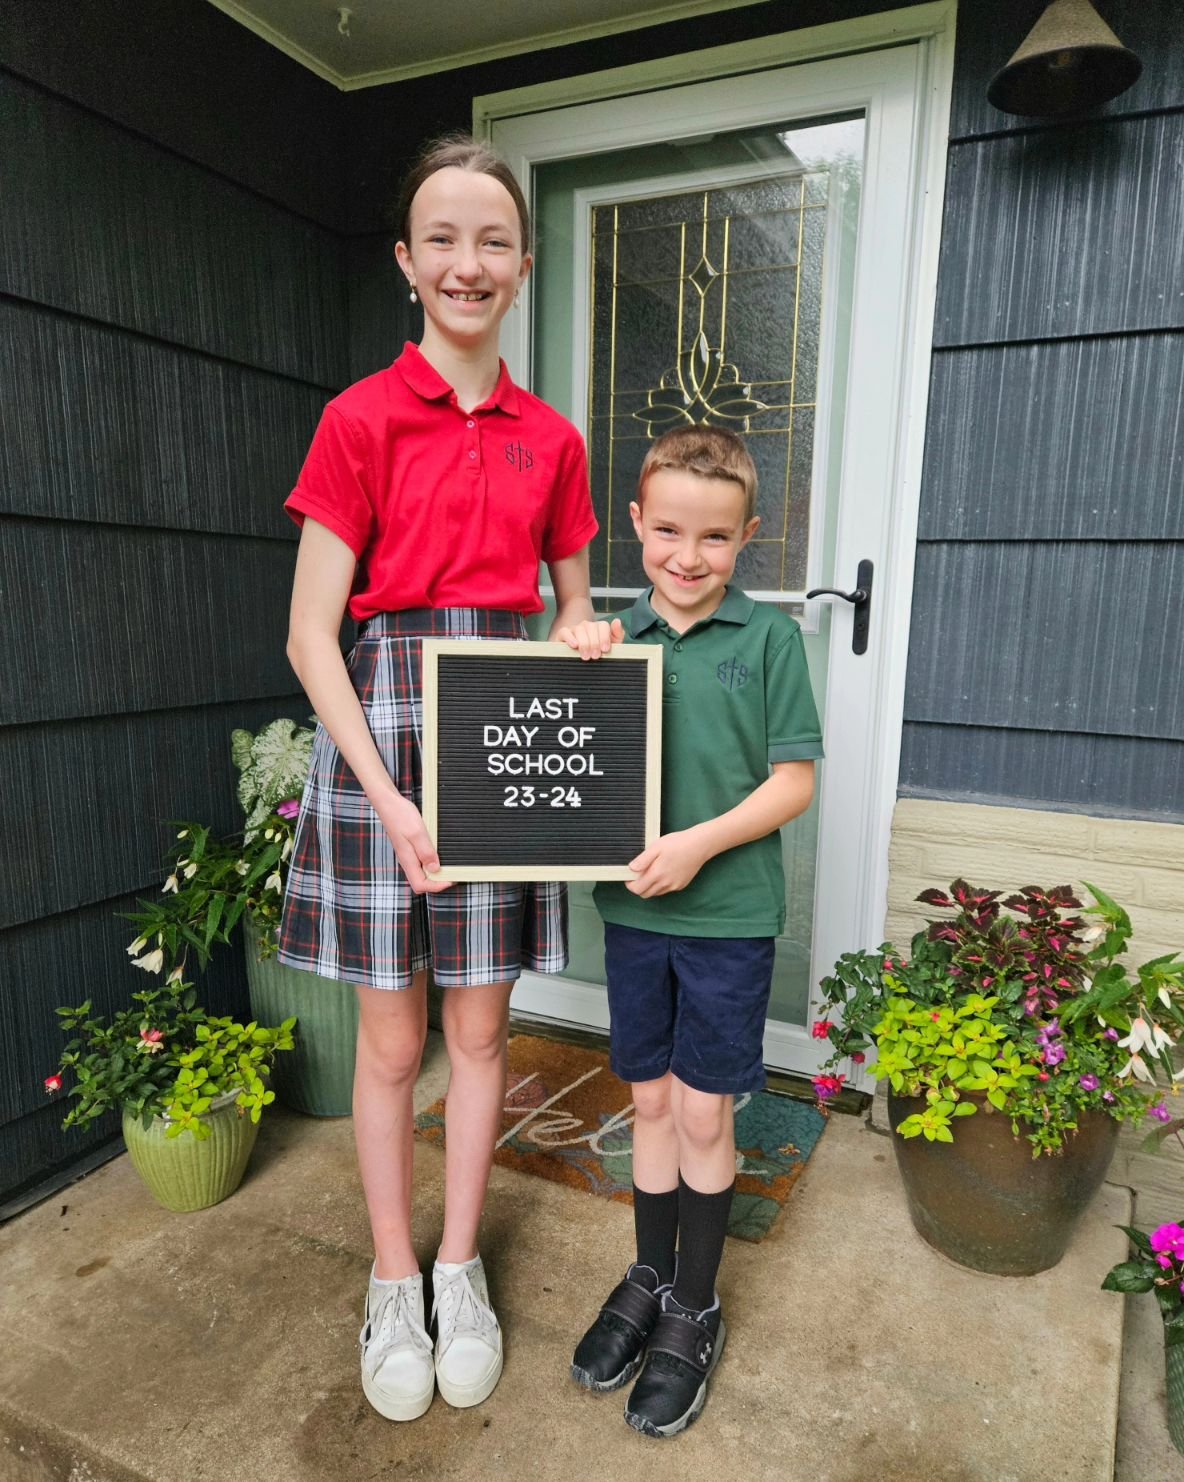 Somehow, another school year is complete! Love watching these two learn, grow, and mature into capable, kind, responsible human beings. I love my career, but being their Mom is the most important work I'll ever do. 💚

Now that school is out, I'll ha